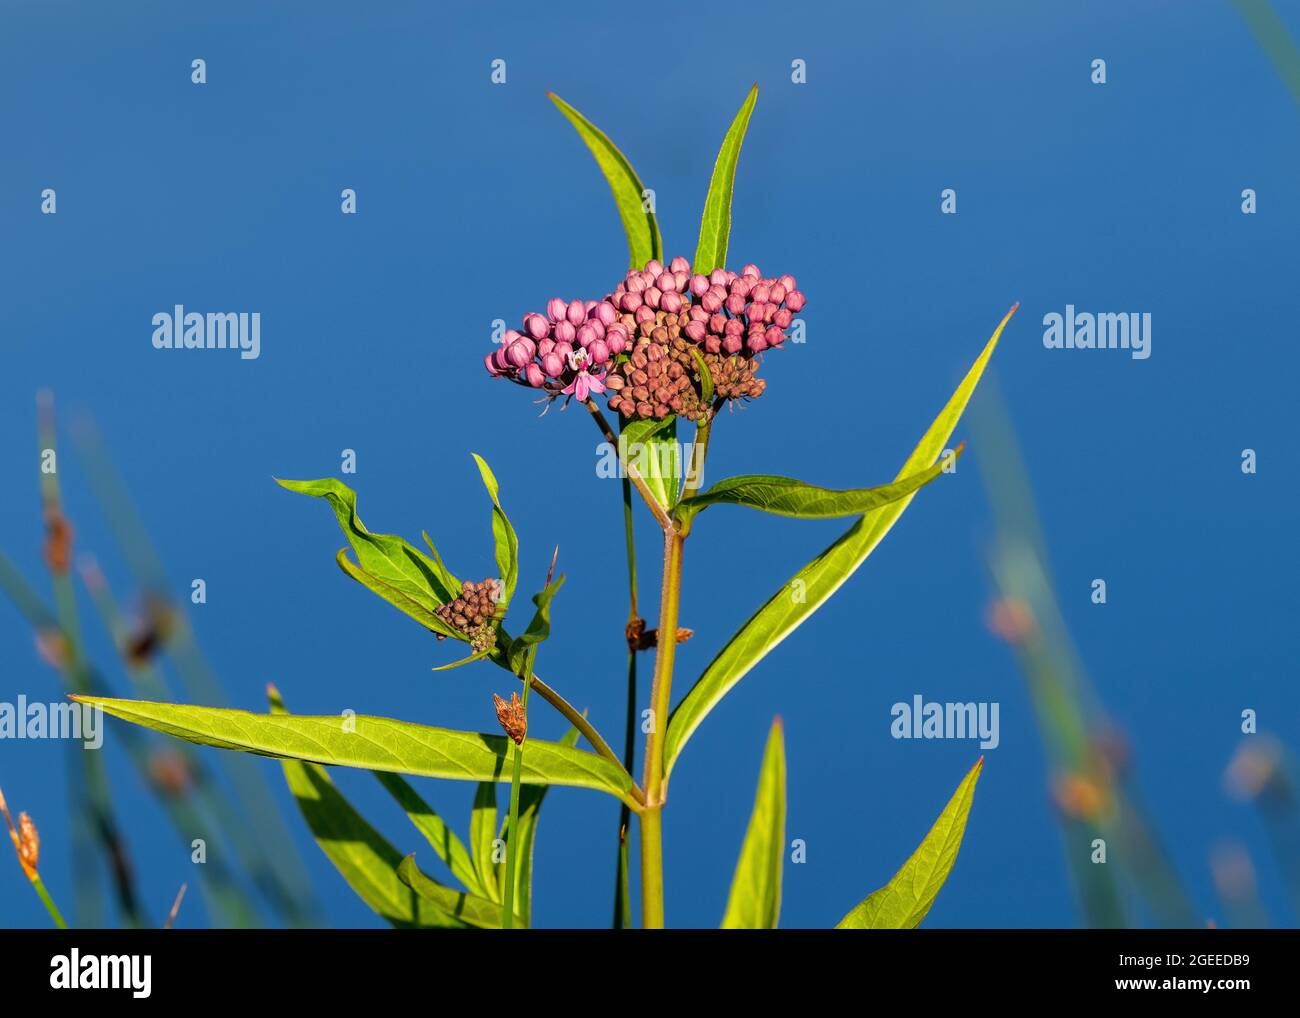 Closeup of a Swamp Milkweed plant (Asclepias incarnata) in the early stages of its blooming cycle. Stock Photo